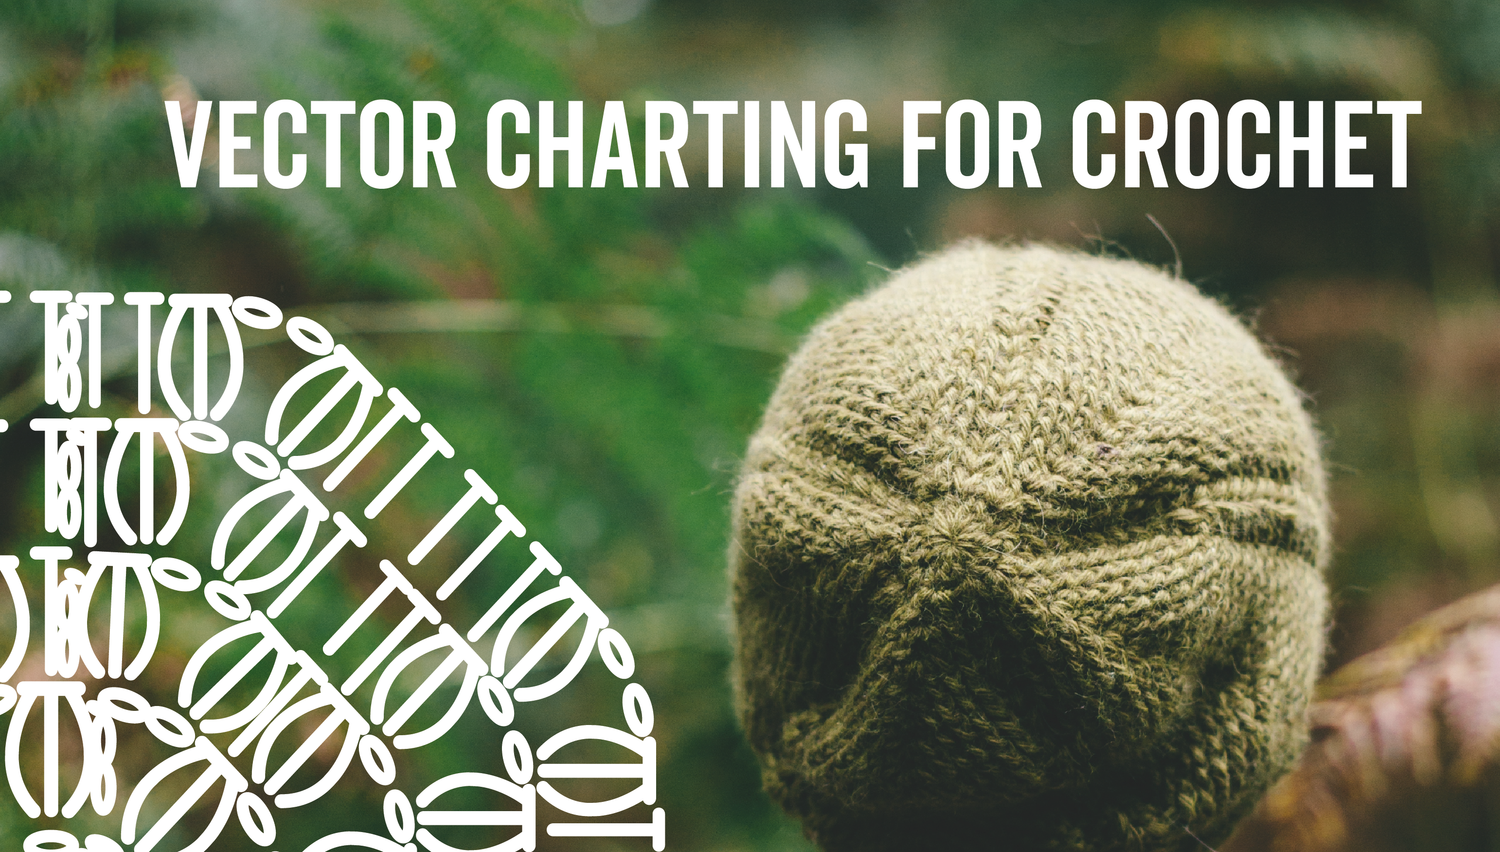 hat and its chart. text reads vector charting for crochet